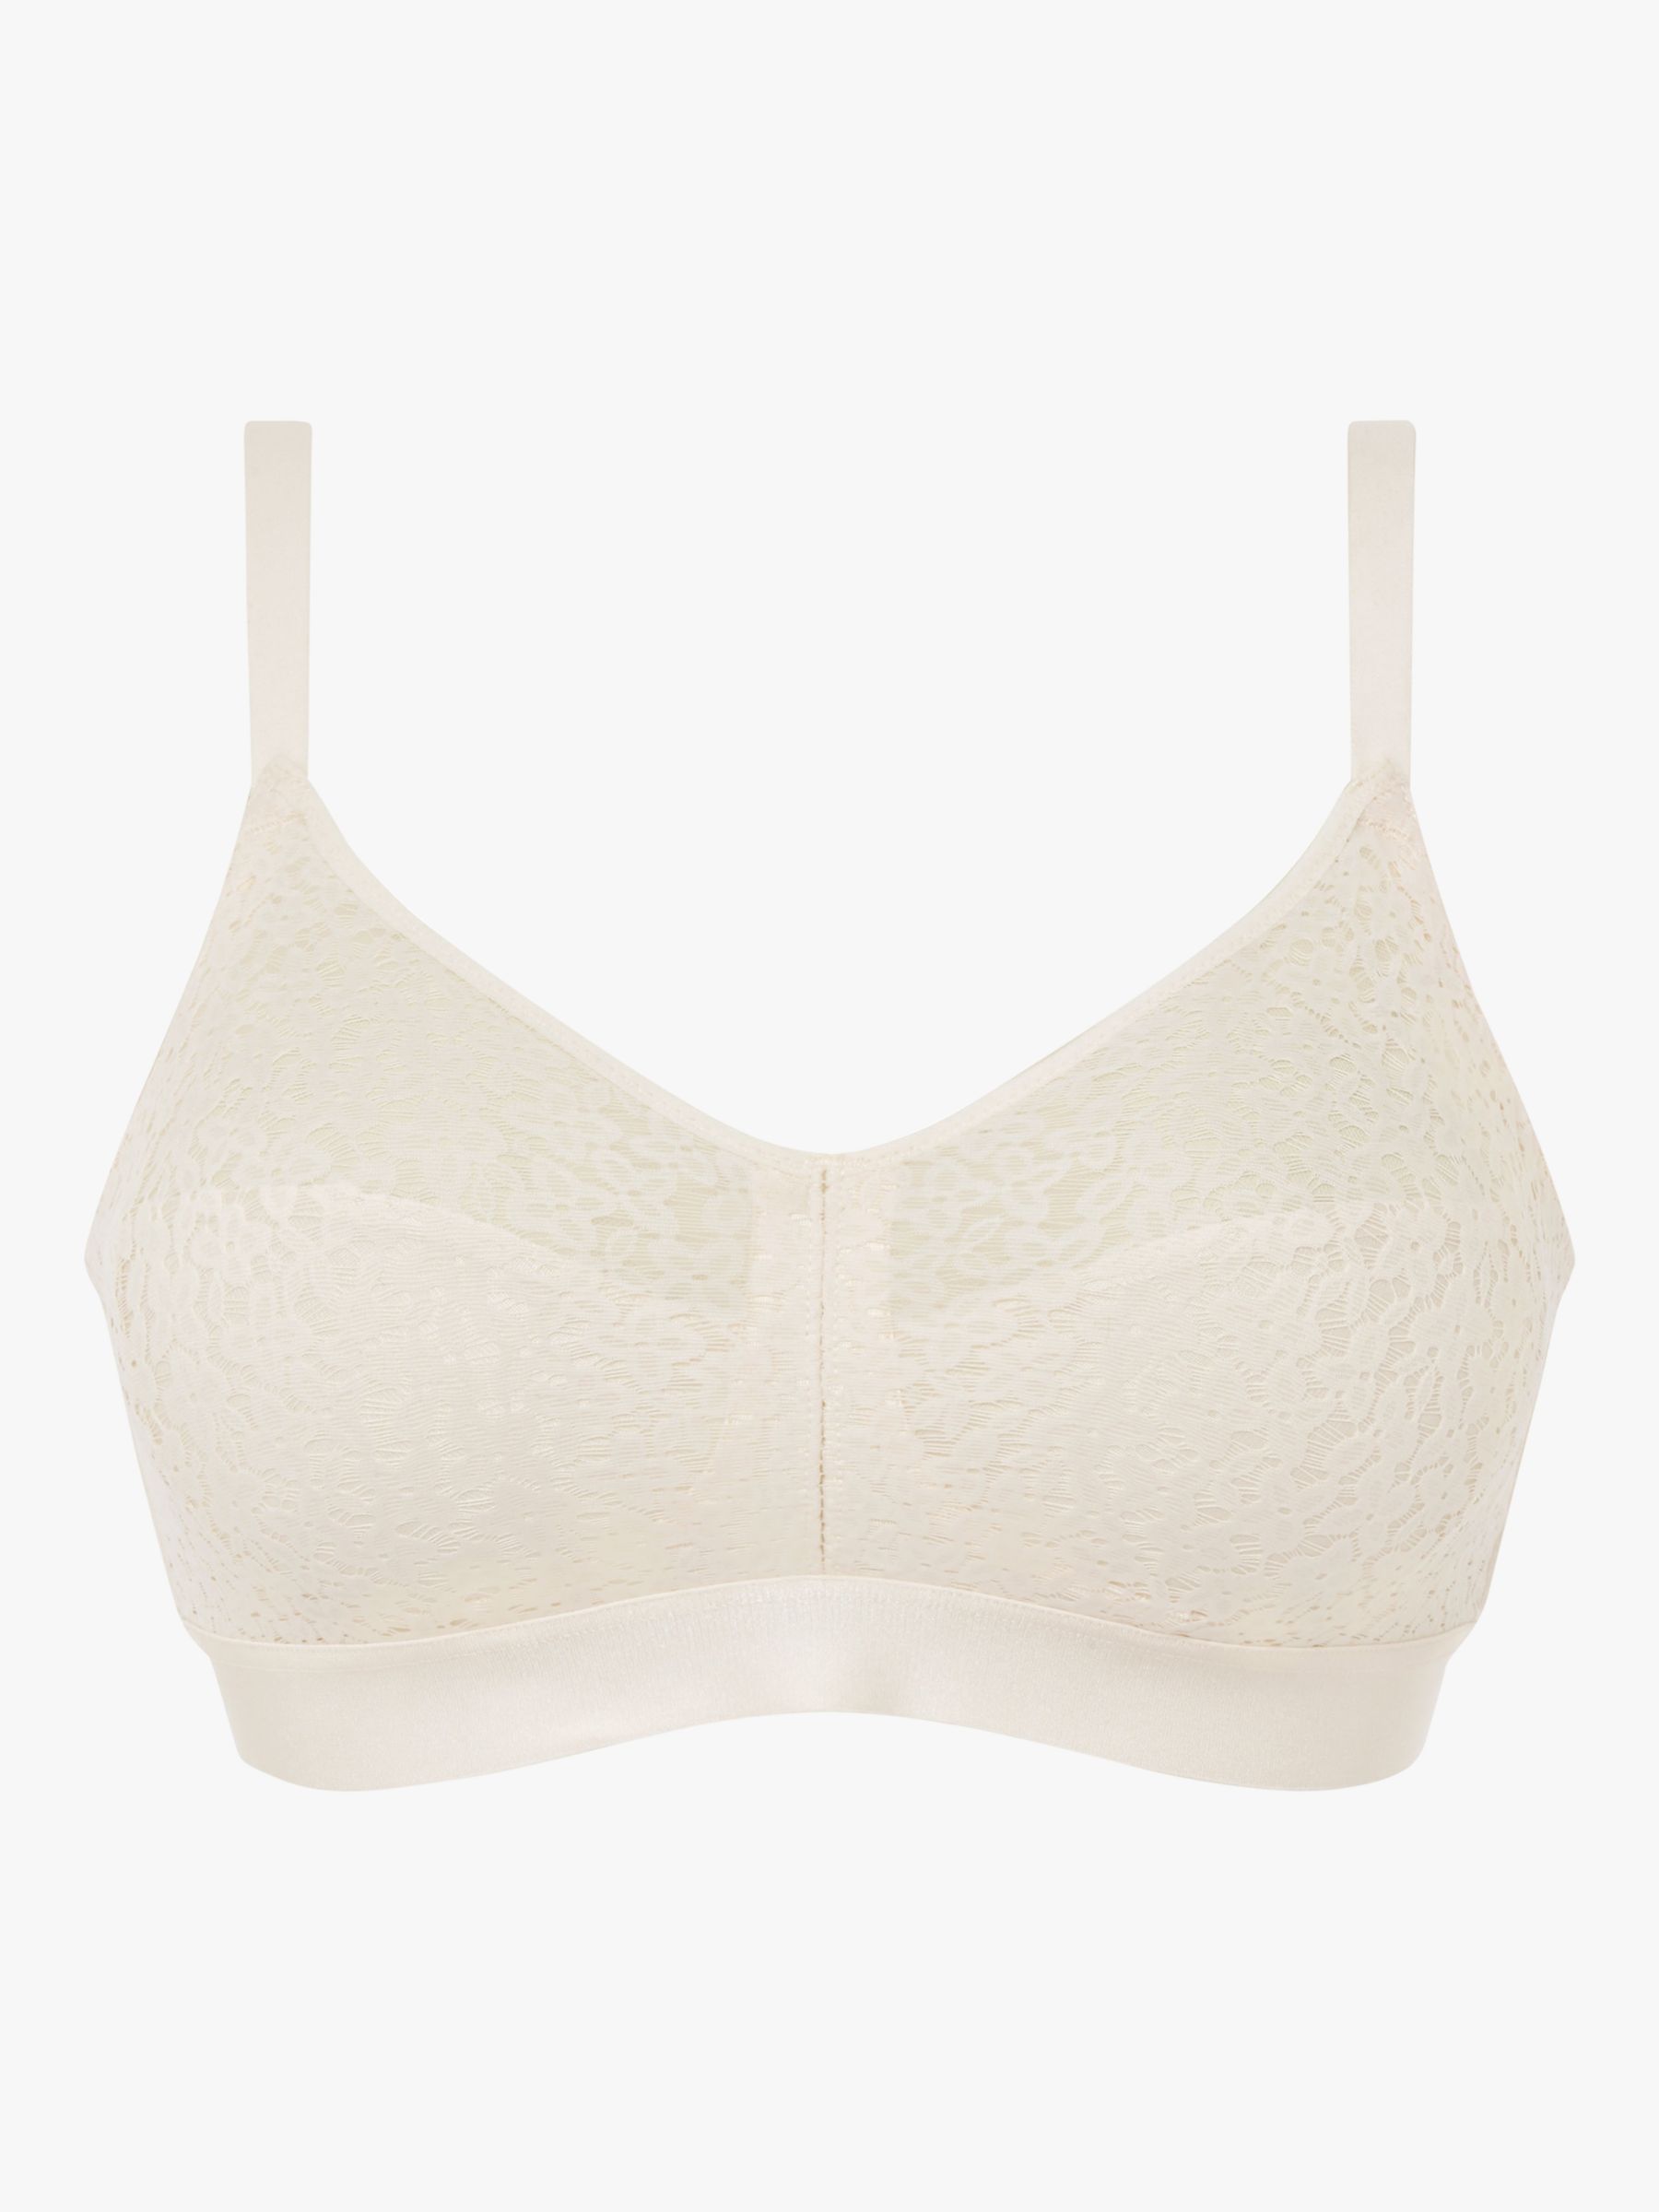 Chantelle Norah Comfort Non-Wired Support Bra, Pearl at John Lewis